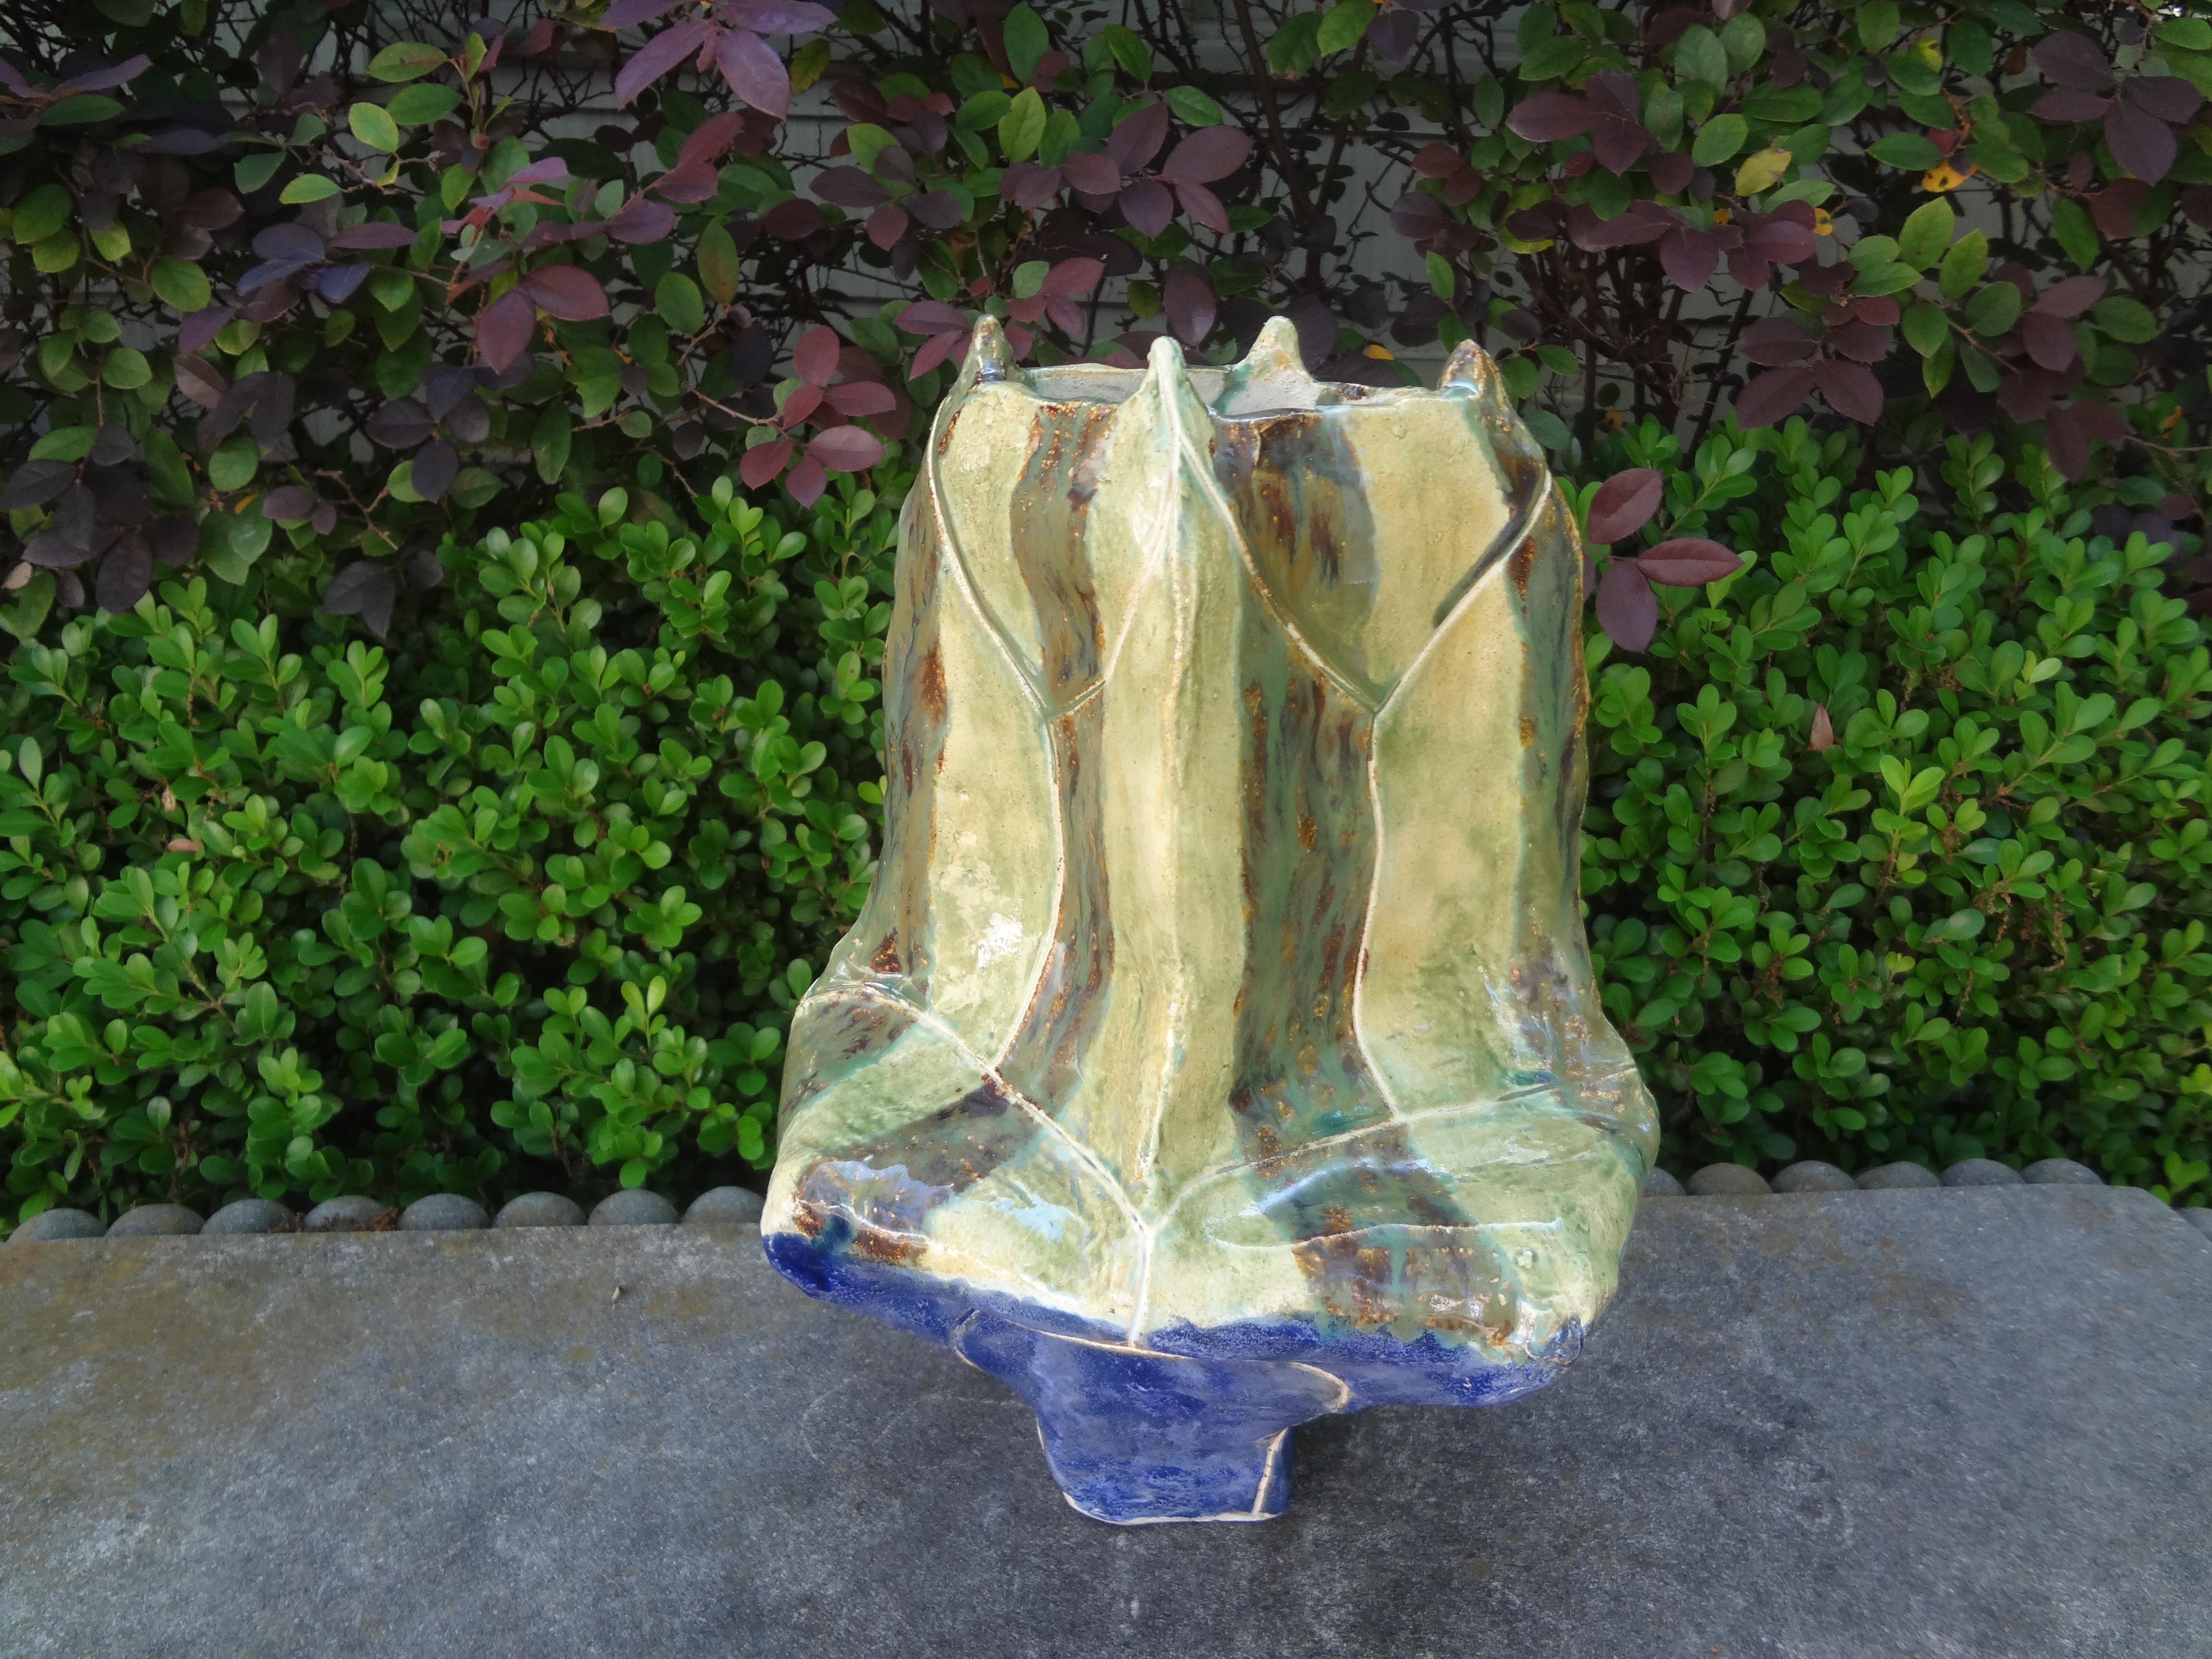 Midcentury Glazed Studio Pottery Vase.
This shapely vintage glazed Studio Pottery vase is a fantastic combination of chartreuse greens and blue. Great as a stand alone vase or grouped with other pottery vases and objects. Perfect table or bookcase